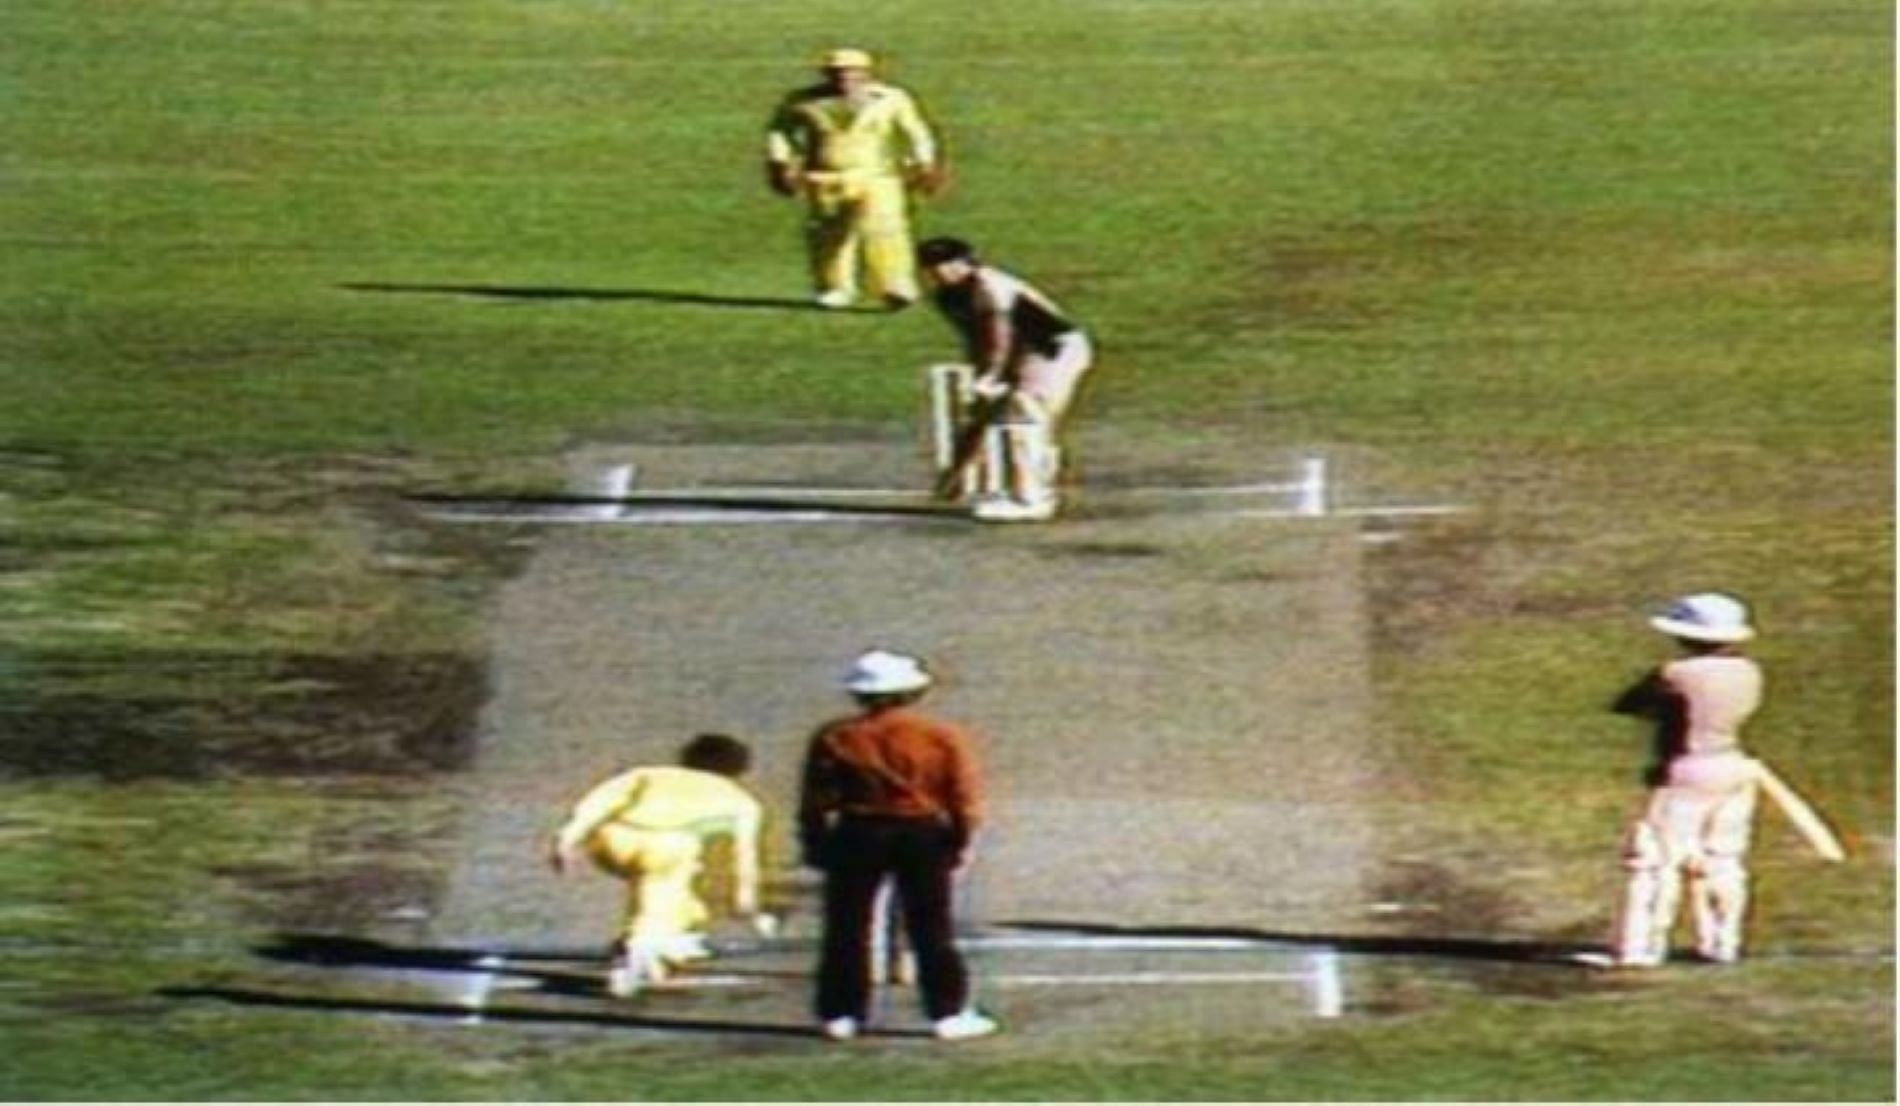 Trevor Chappell bowls underarm in an ODI game against New Zealand.